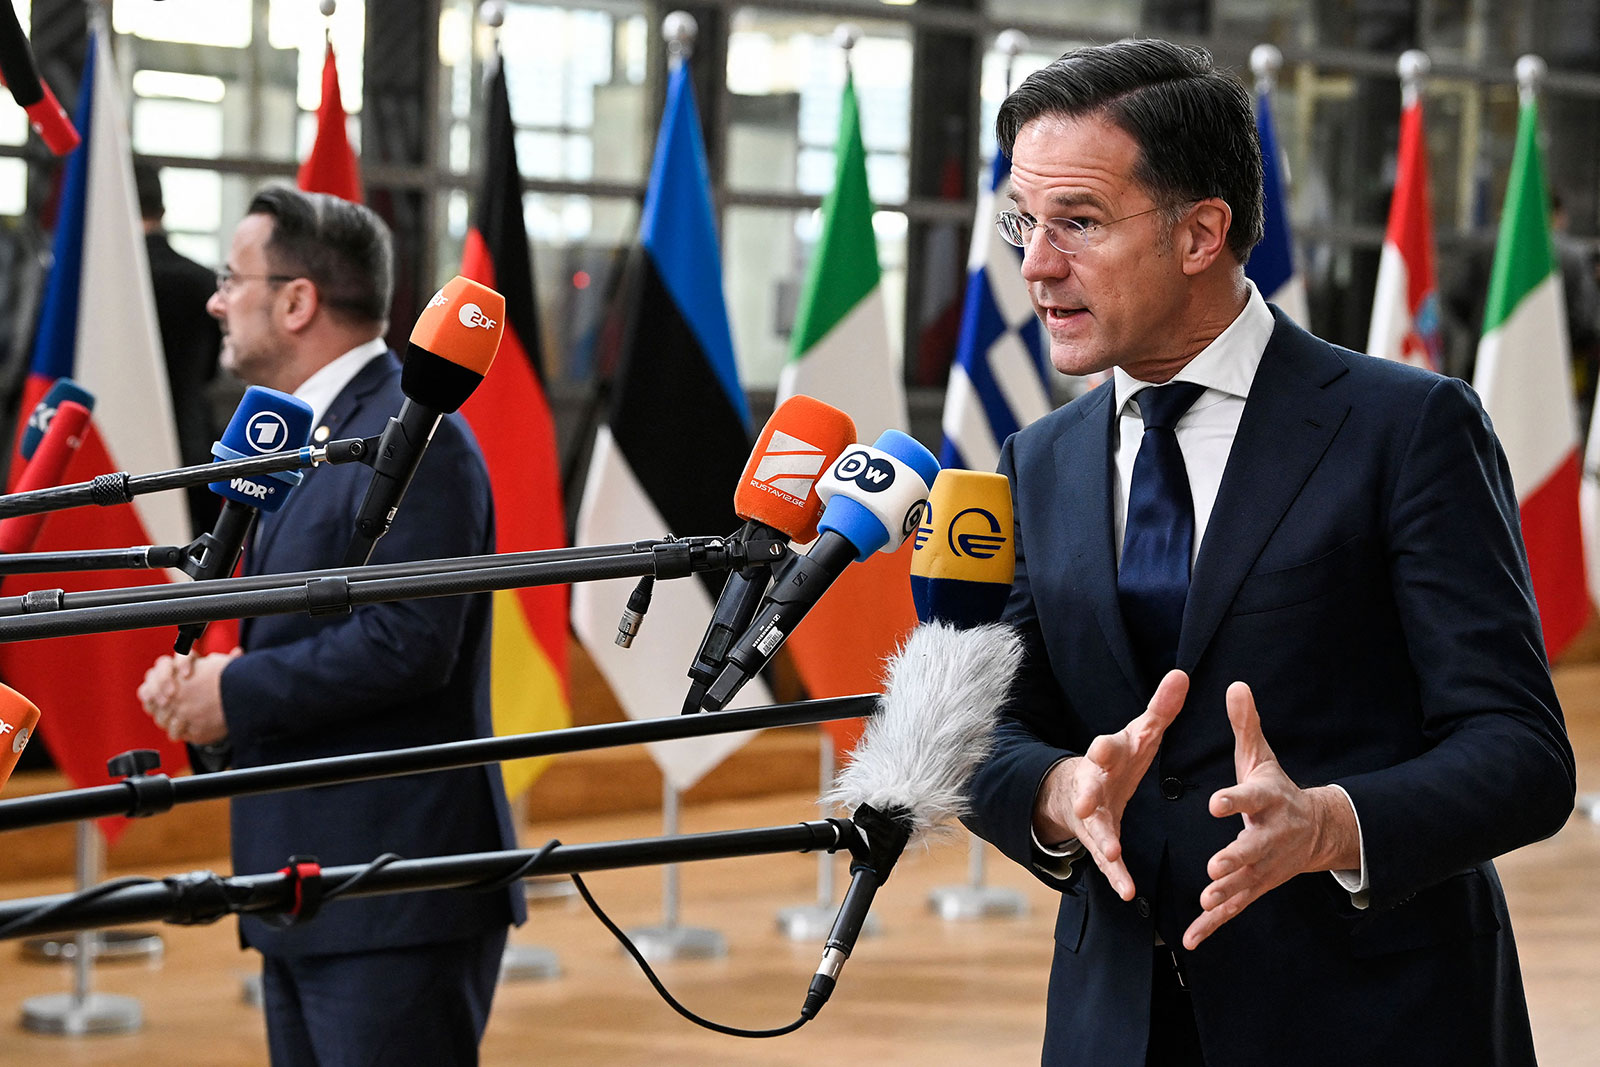 Dutch Prime Minister Mark Rutte speaks to the press at EU parliament in Brussels on February 9.